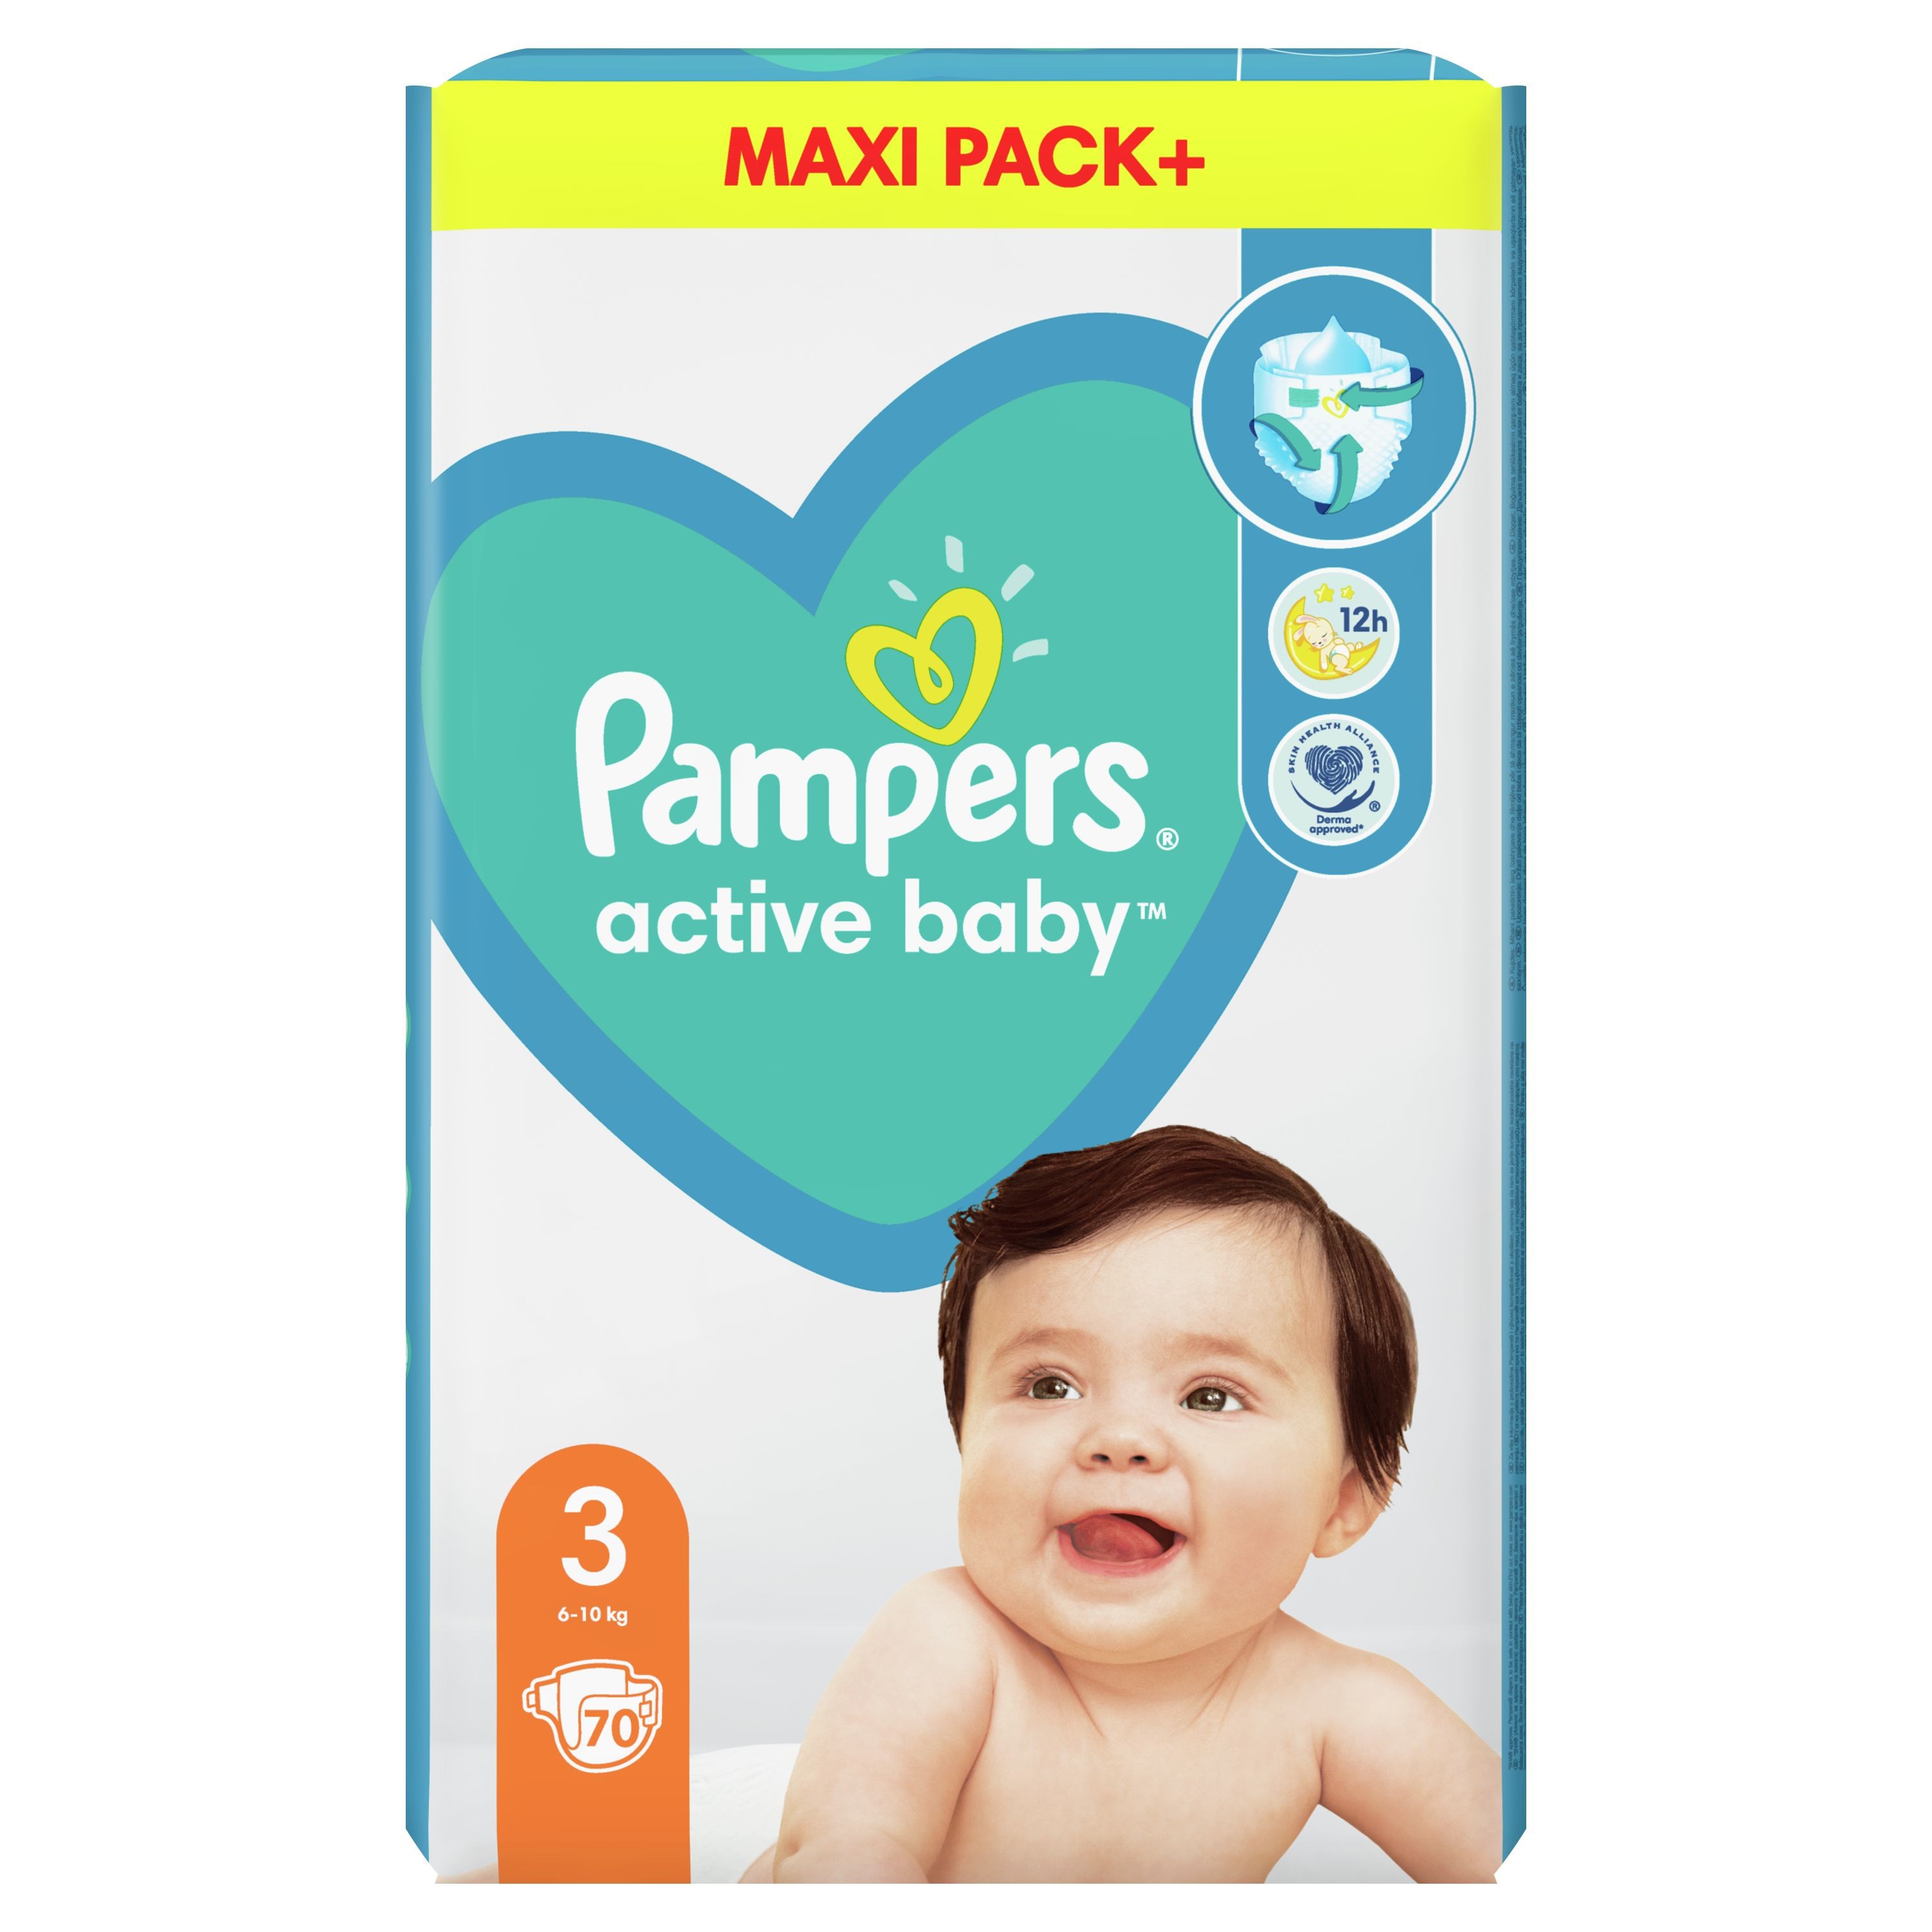 pampers premium care new